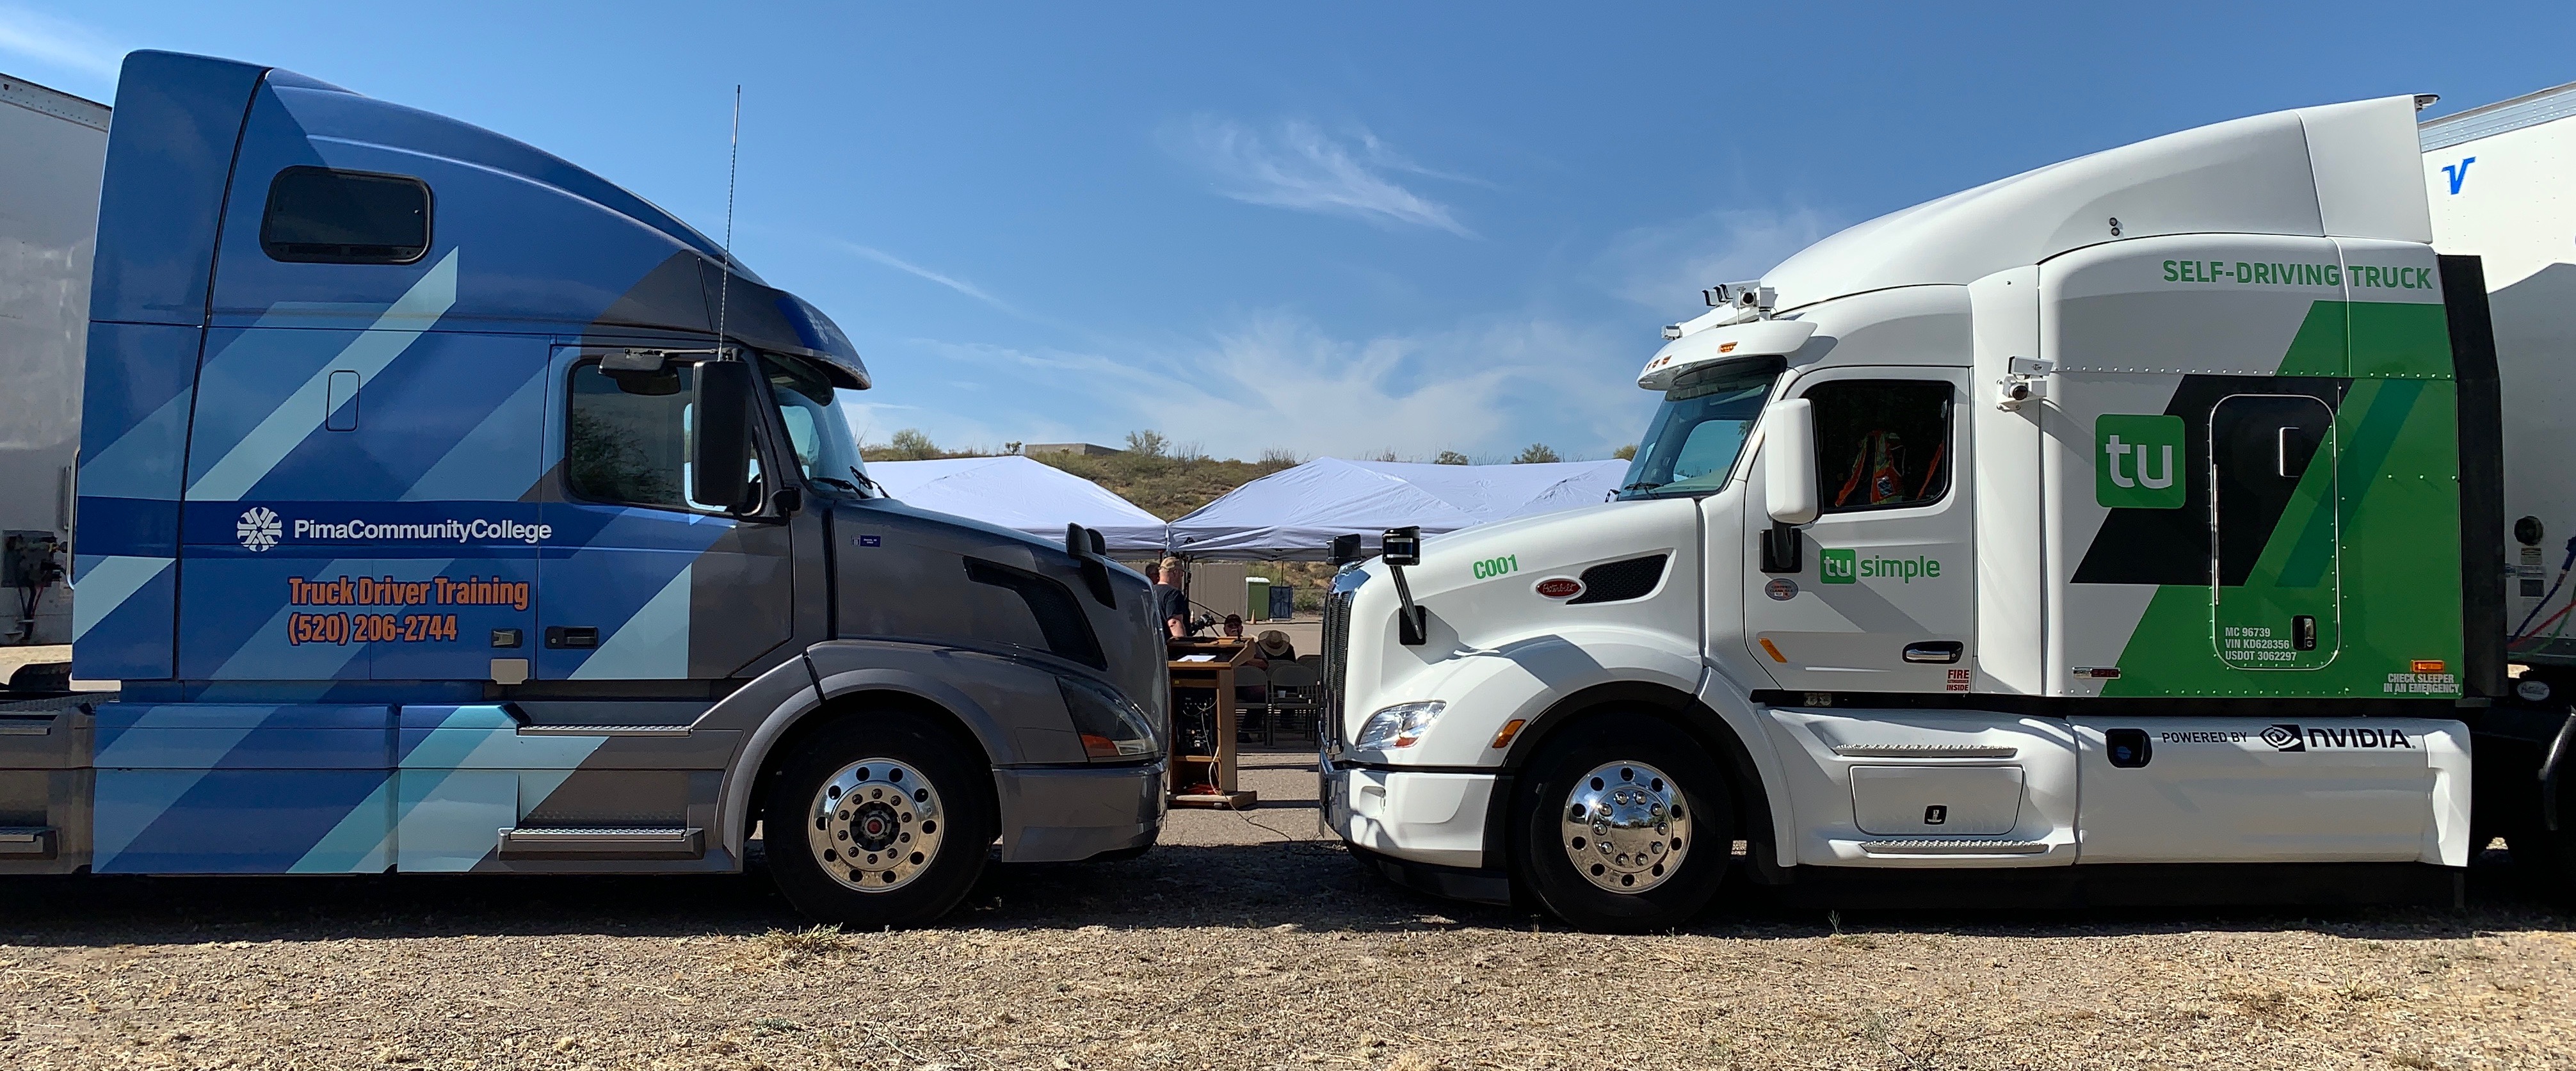 A Pima truck faces a TuSimple industry truck